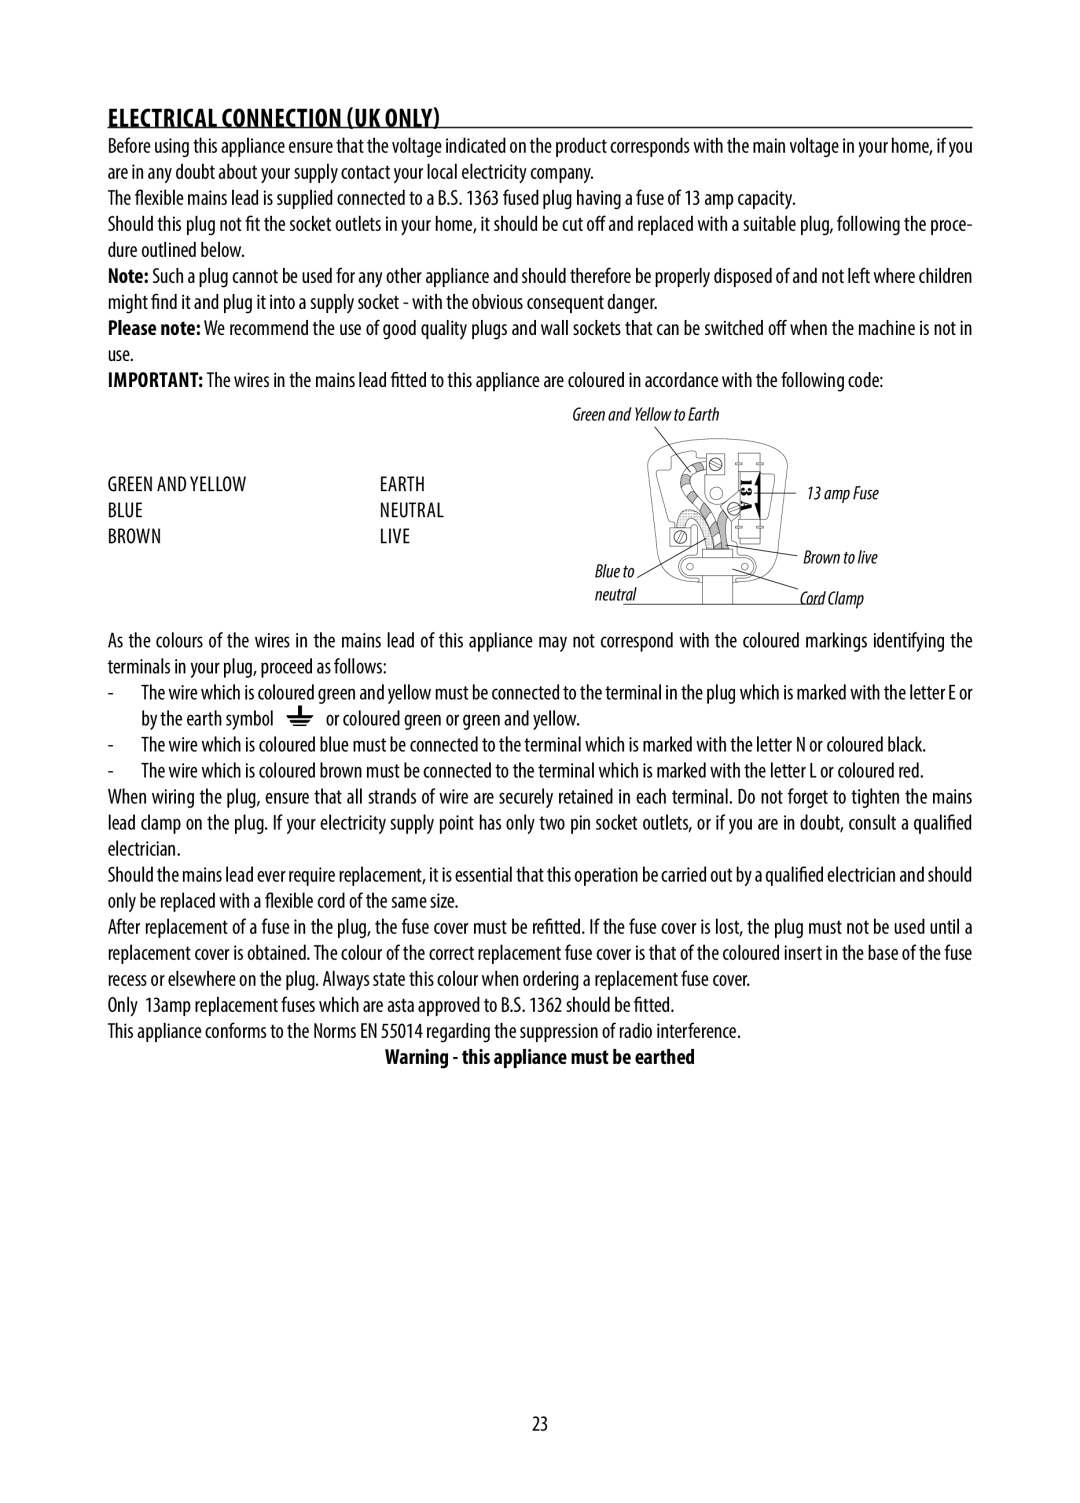 DeLonghi GB, DE, ECAM28.46X, 10.13 manual Electrical Connection Uk Only, Warning - this appliance must be earthed 